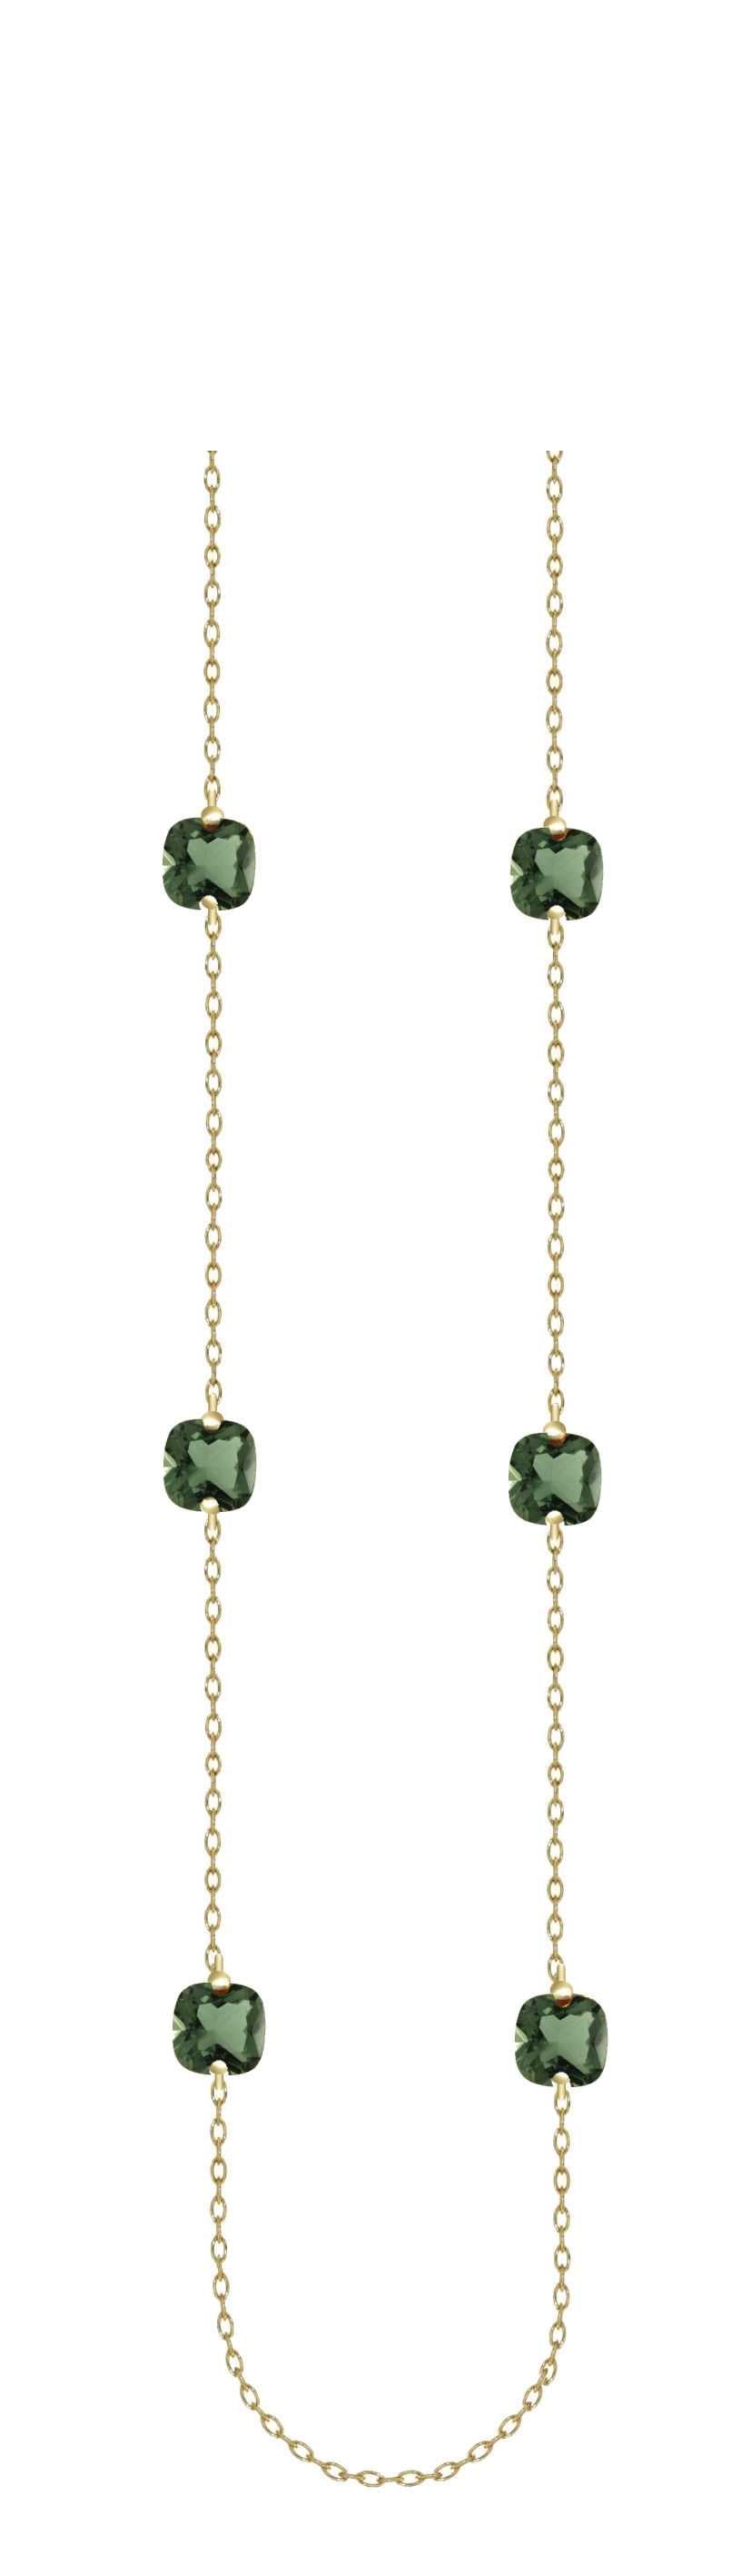 Pitti and Sisi Necklace Rainbow Silver 925 Finish PVD Yellow Gold Quartz Green CL 9594G/069